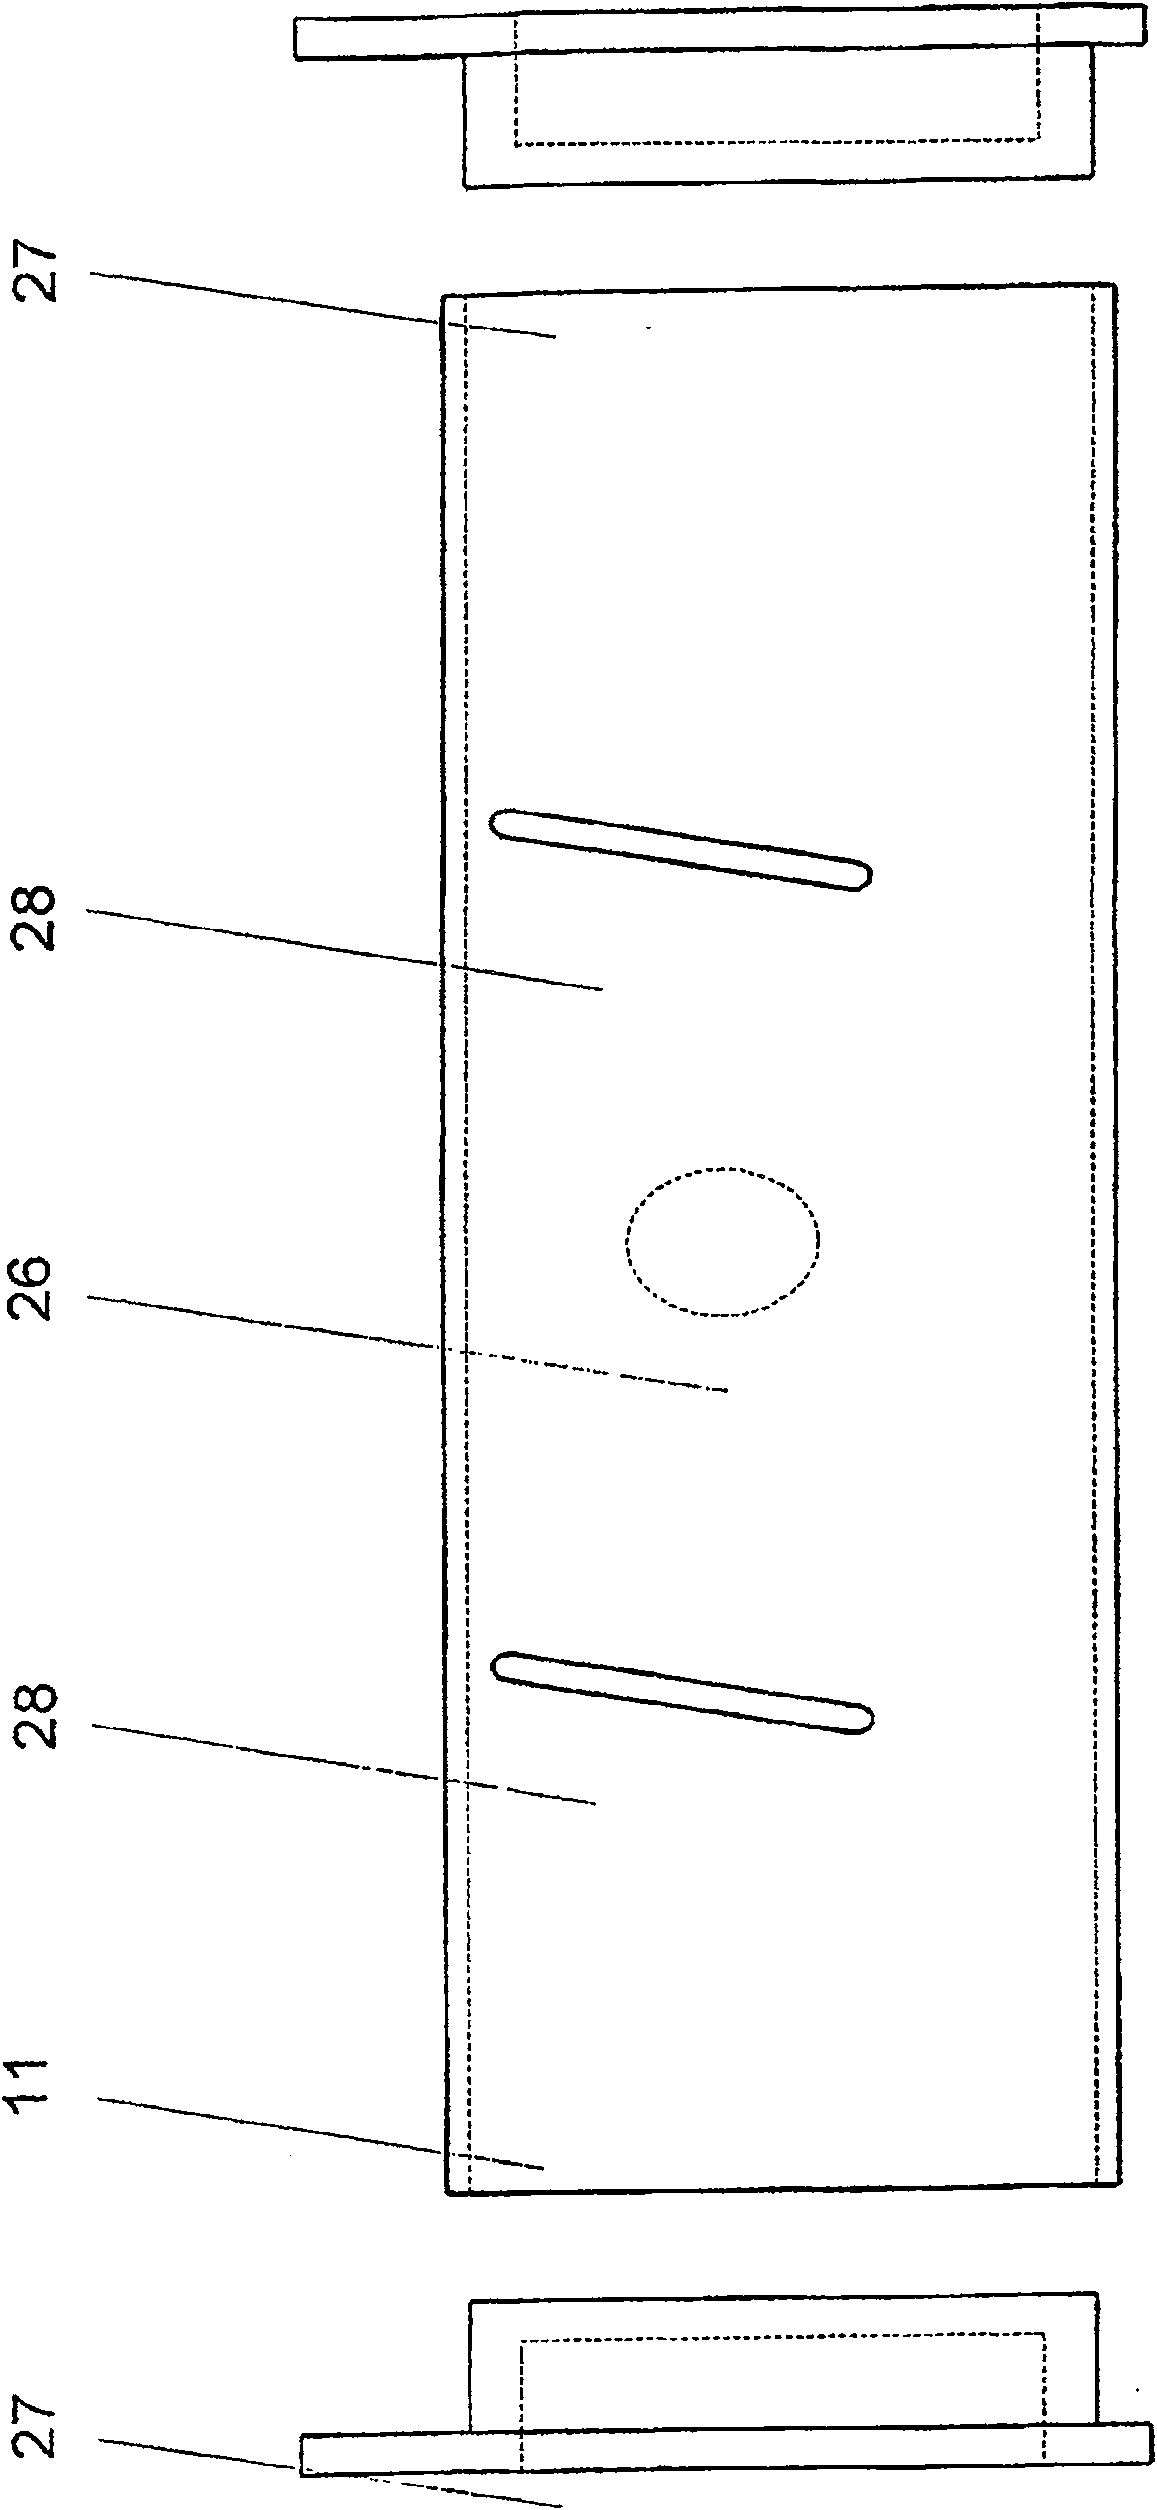 Apparatus for condensing a drafted fibre sliver